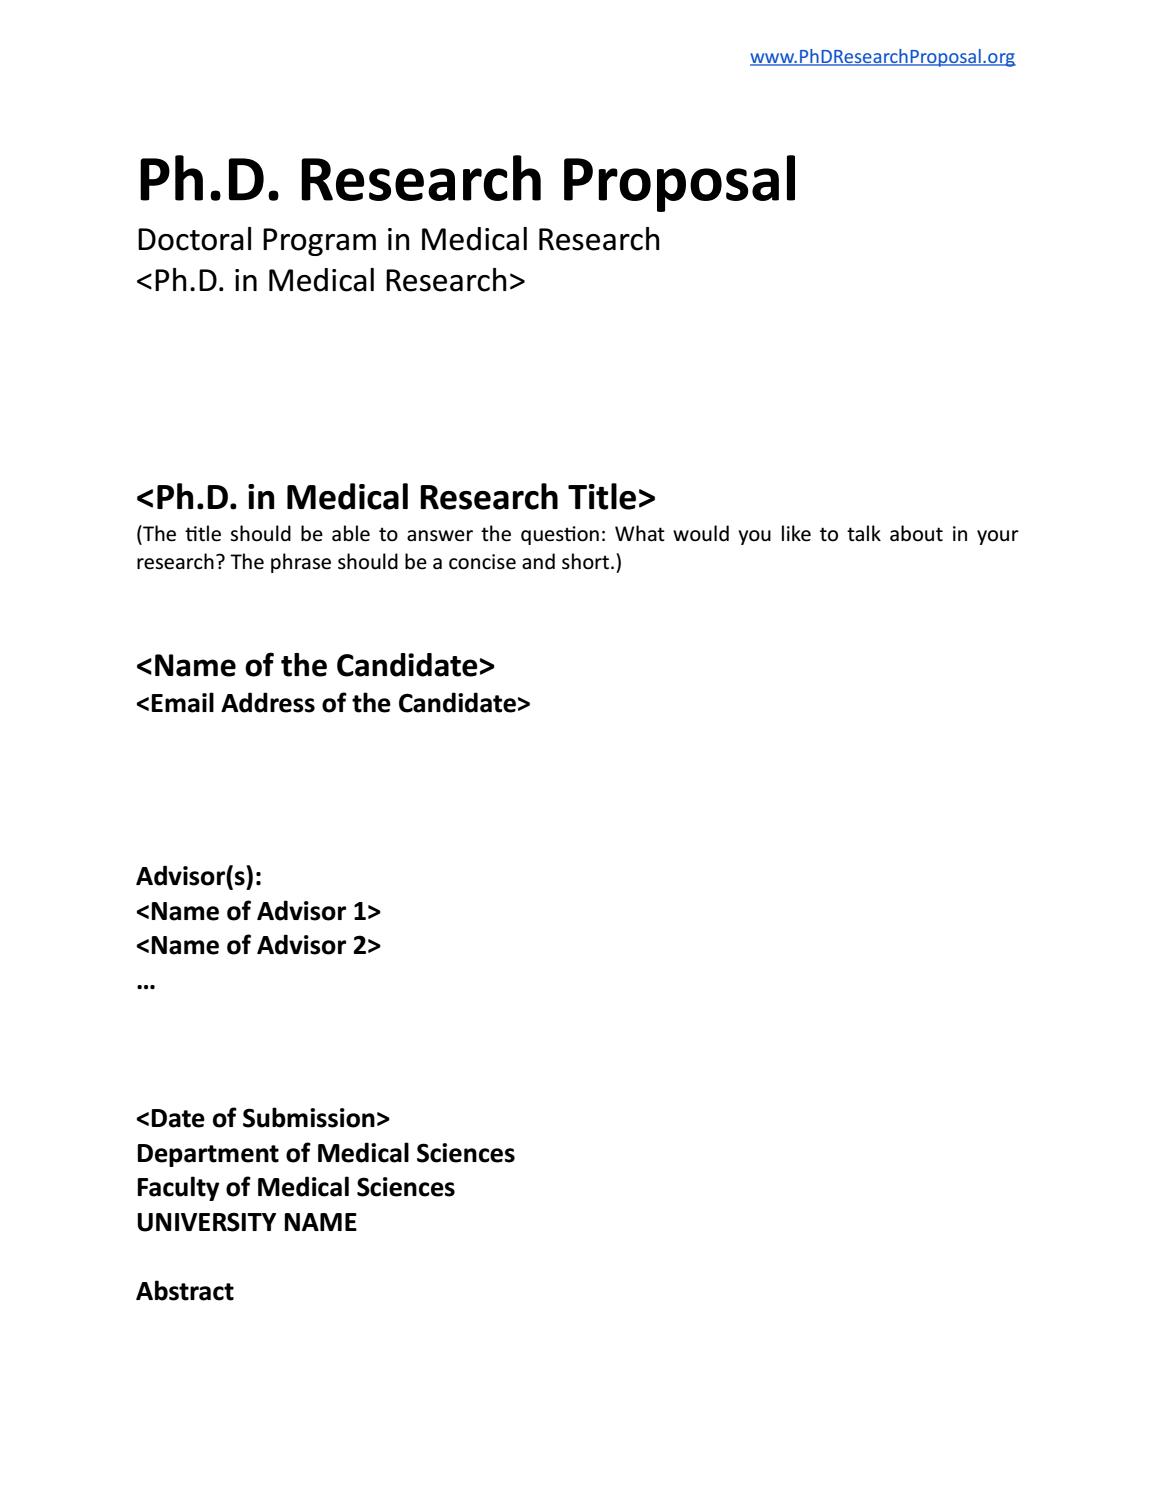 Phd Research Proposal Template By Phd Research Proposal Issuu